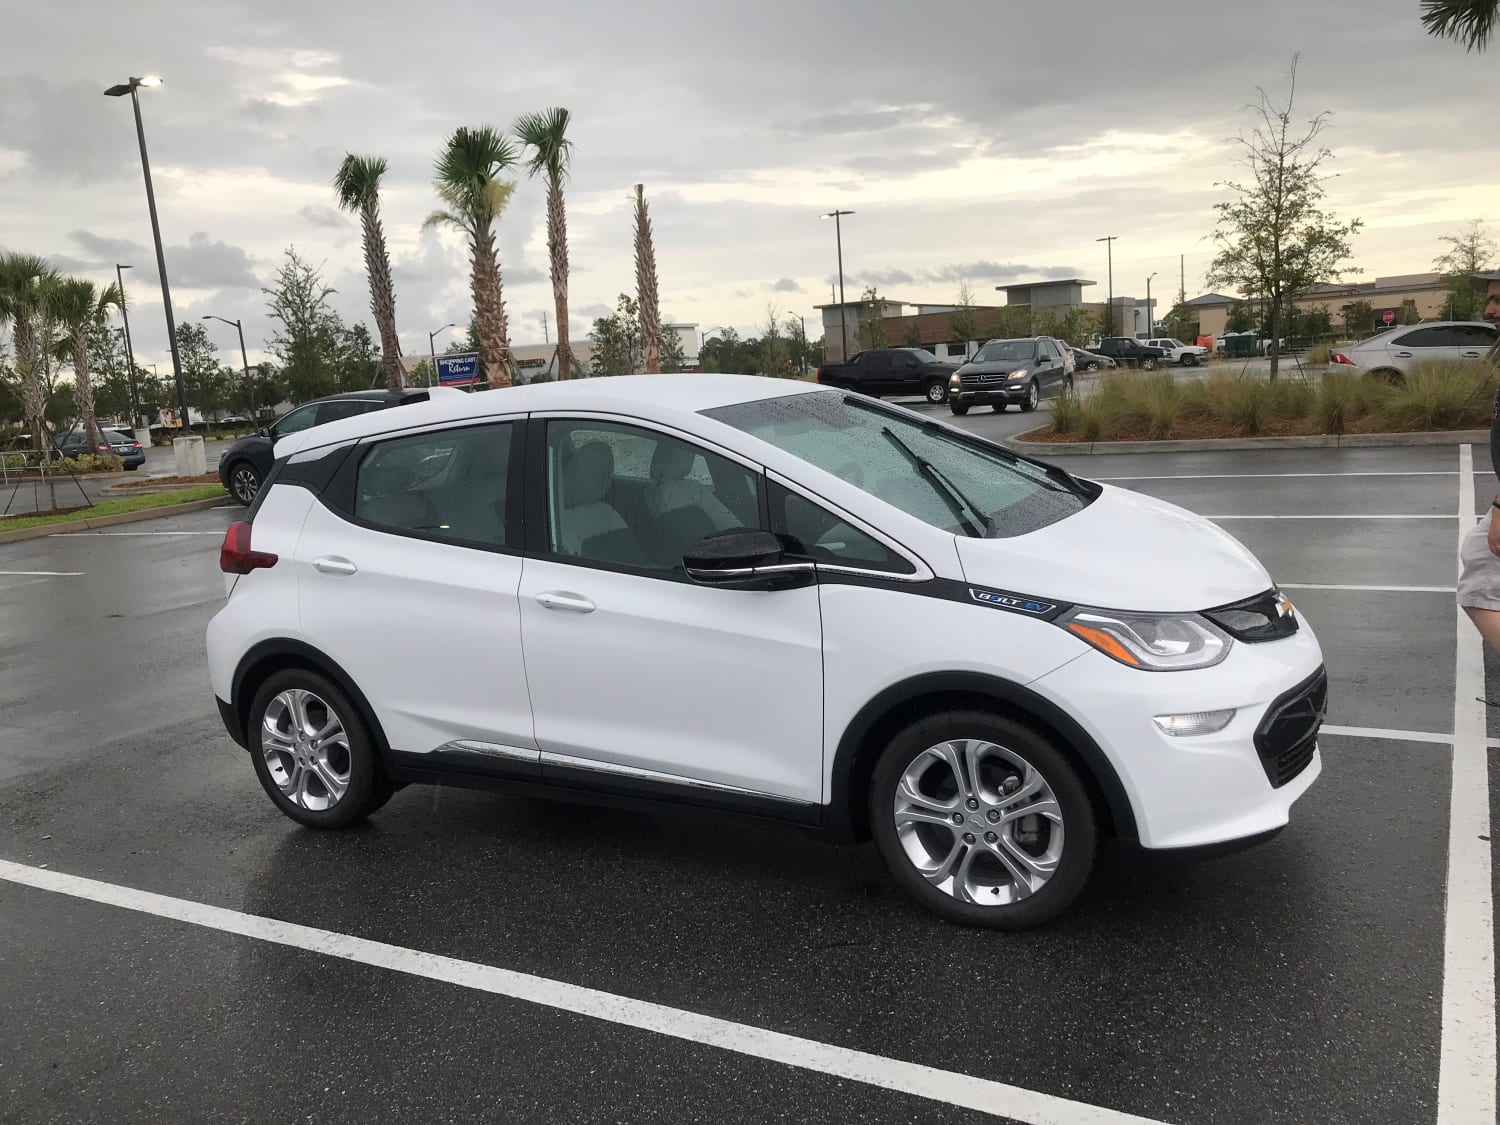 2019 Chevrolet Bolt: Review & Experience from an Energy Analyst Finally Making the EV Leap